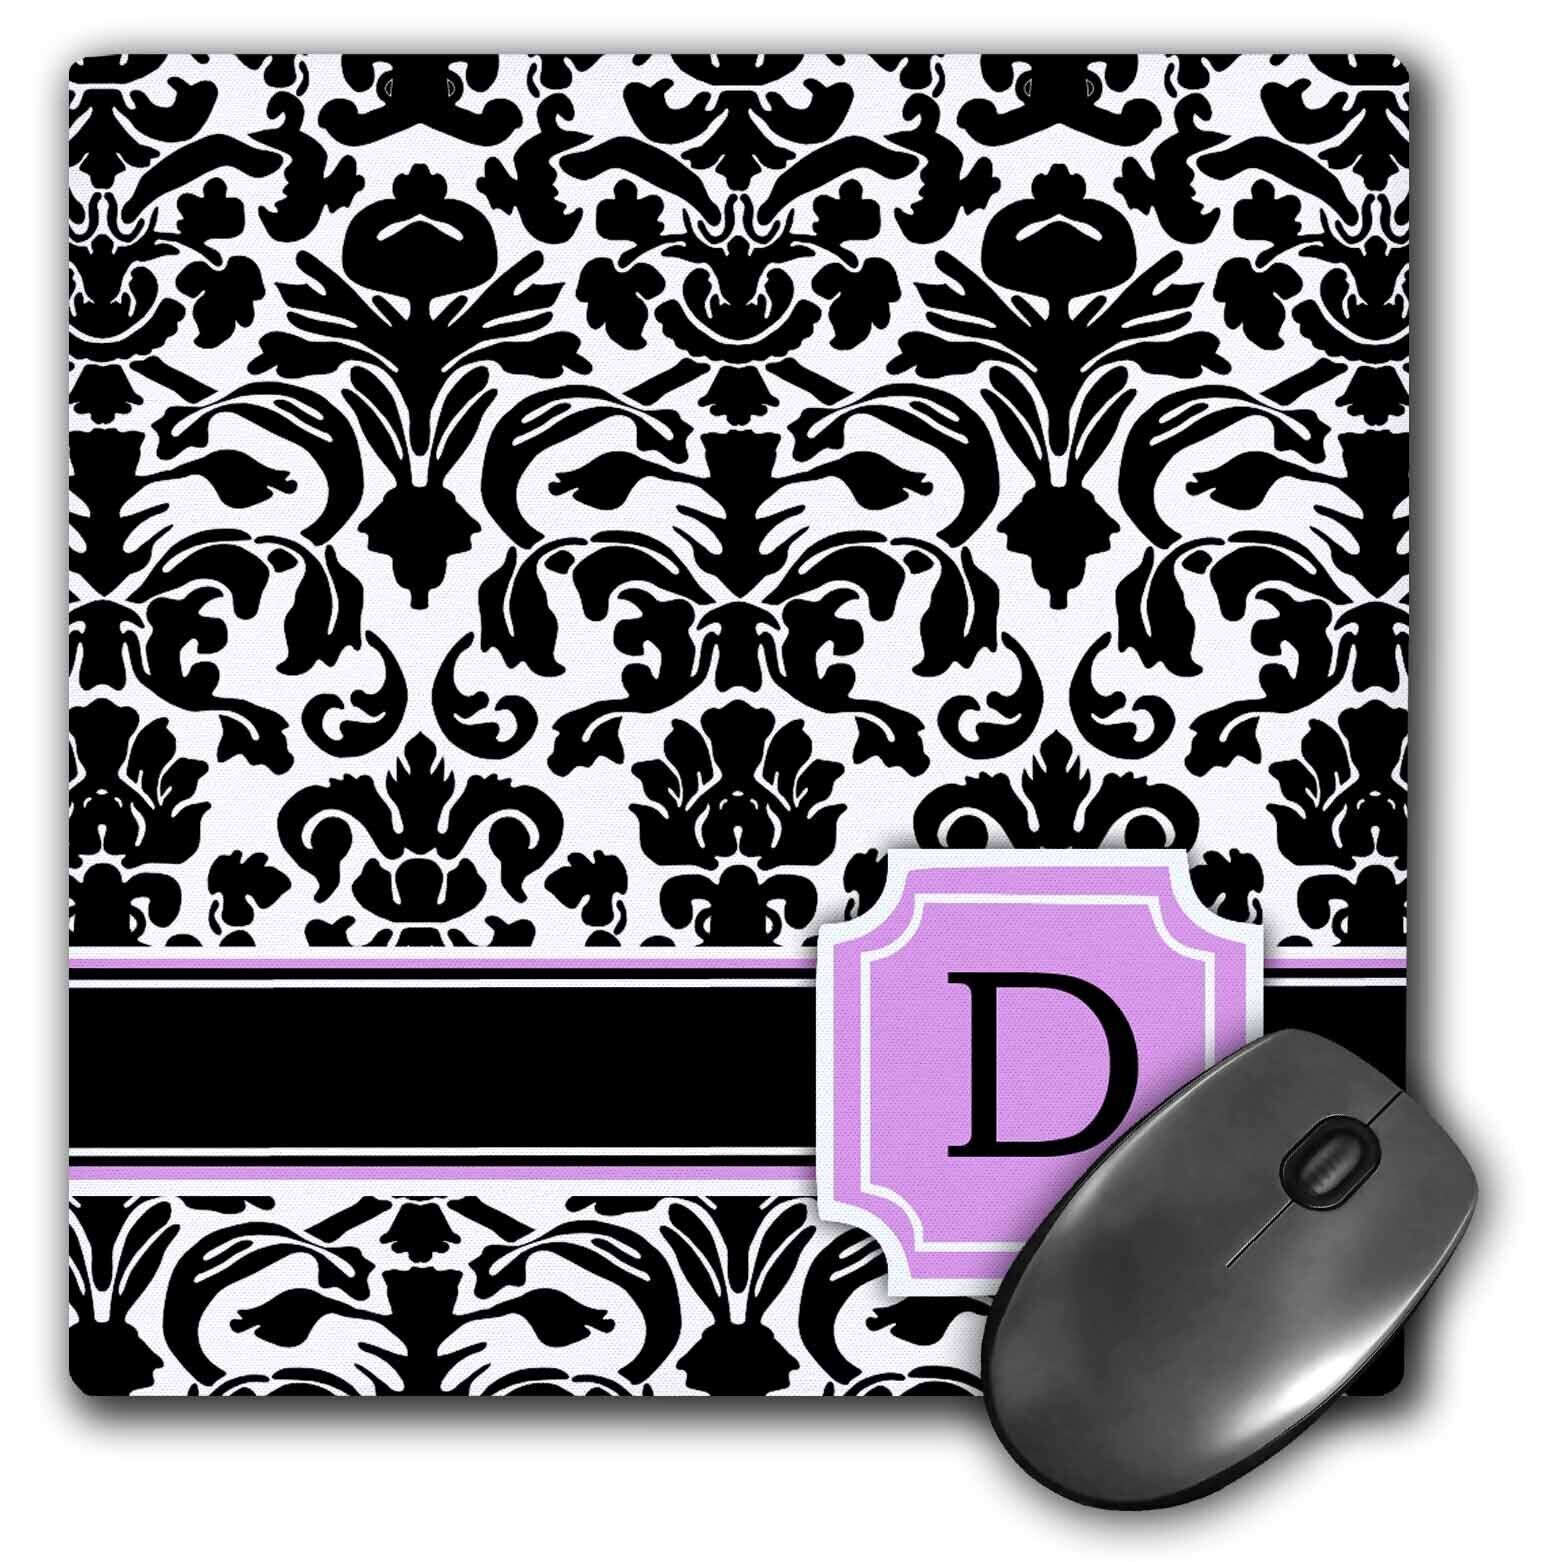 3dRose Personal initial D monogrammed pink black and white damask pattern girly